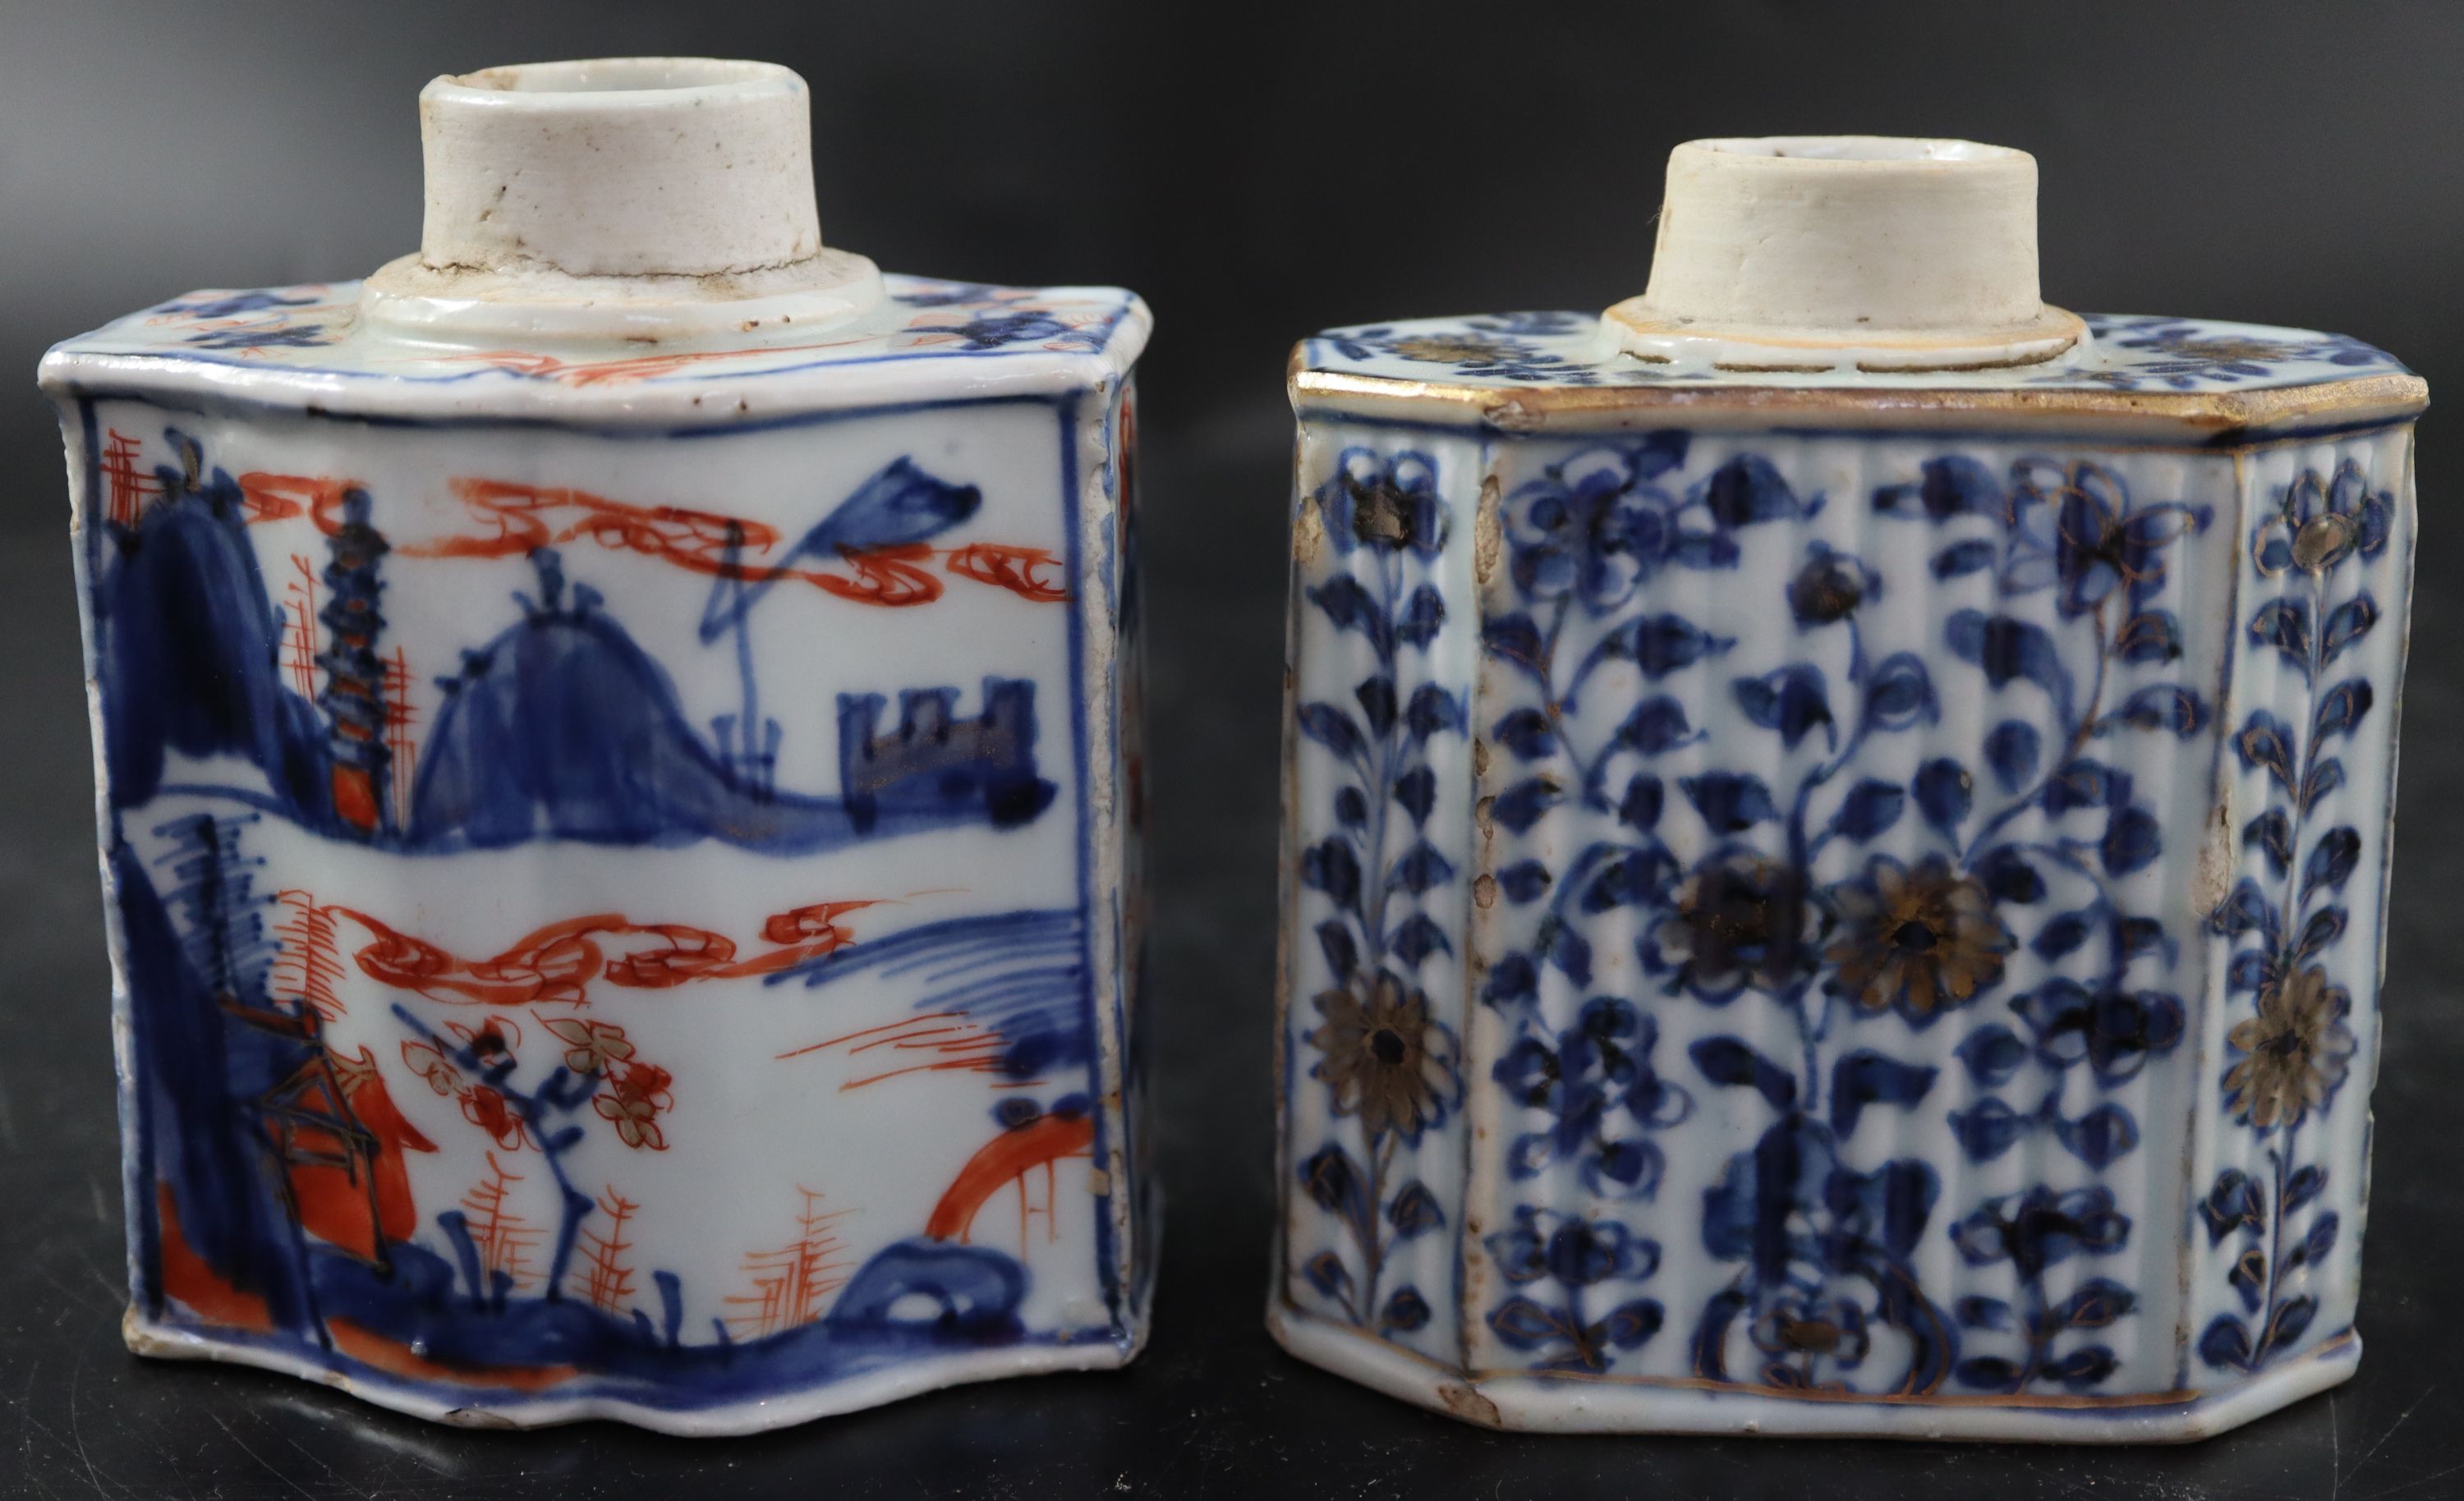 Two 18th century Chinese porcelain tea caddies, a cup and a Ming enamelled bronze lid